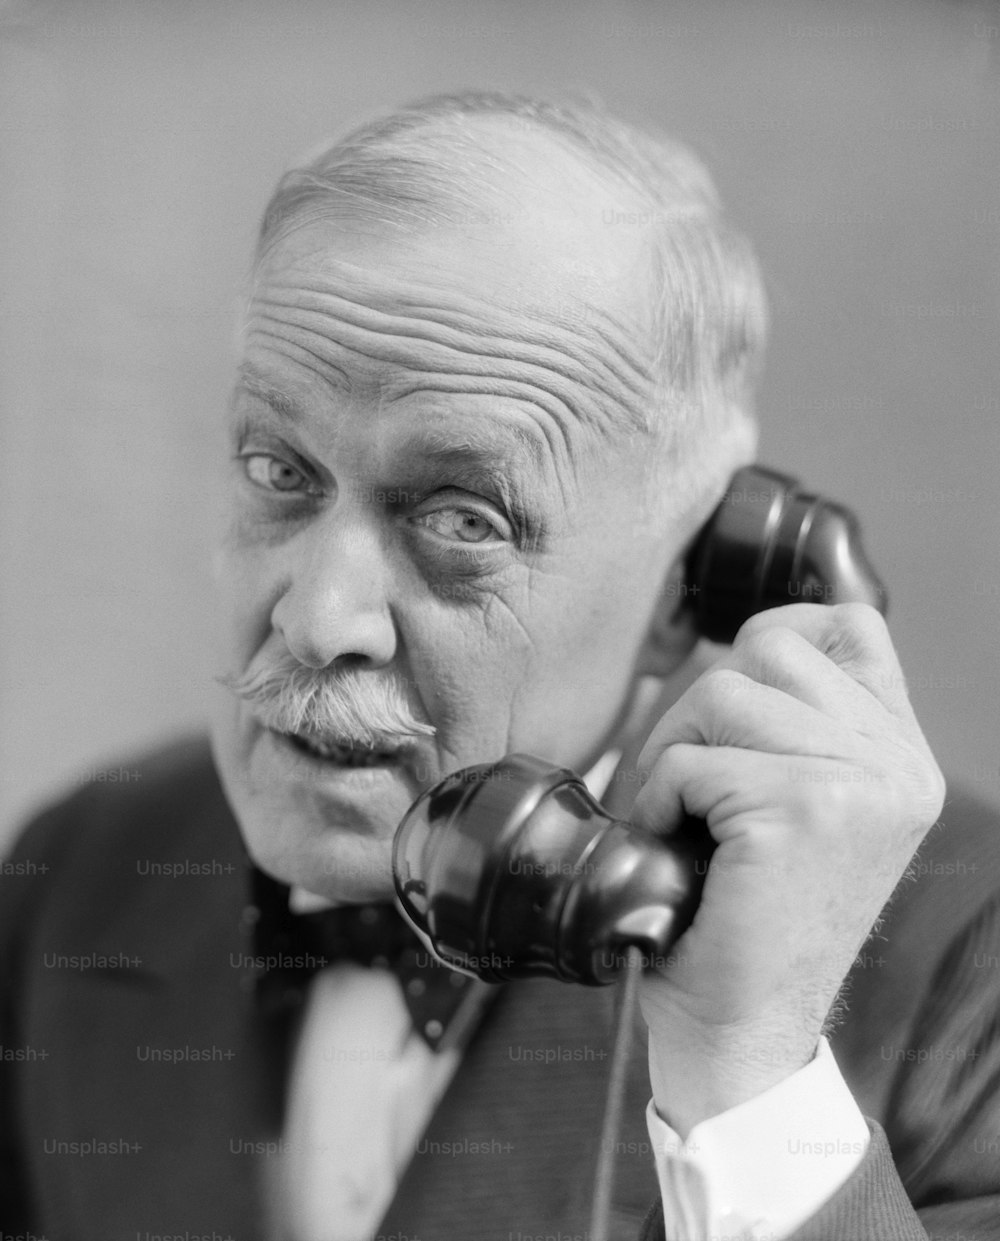 UNITED STATES - Circa 1930s:  Elderly Man Head Shot On Phone Worried Concerned Expression Moustache Wrinkled Brow Forehead Bowtie Distinguished Businessman.